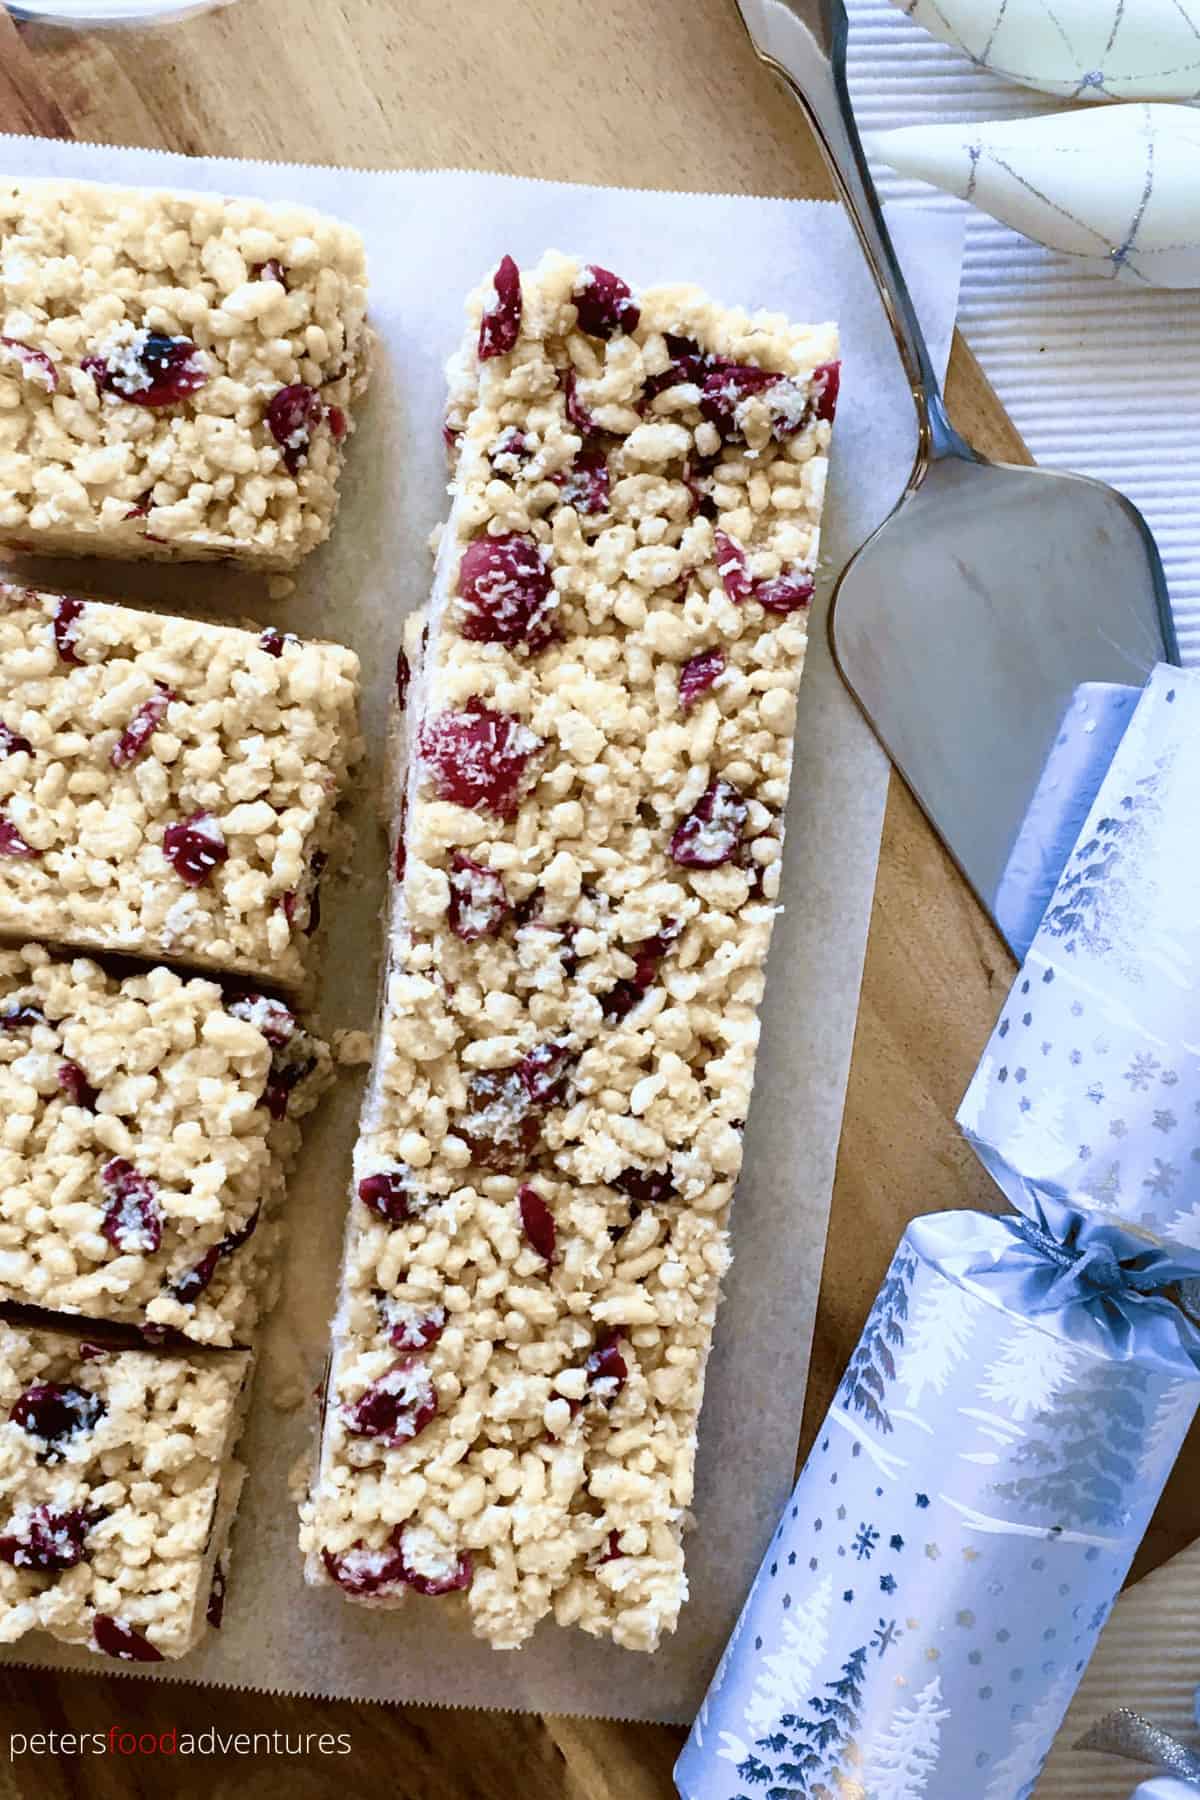 White Christmas recipe is an Australian favorite, easy to make, loved by kids and grown ups. Perfect for the holidays! Made with Crisco/Copha or coconut oil, dried cranberries, candied cherries, Rice Krispies and white chocolate.